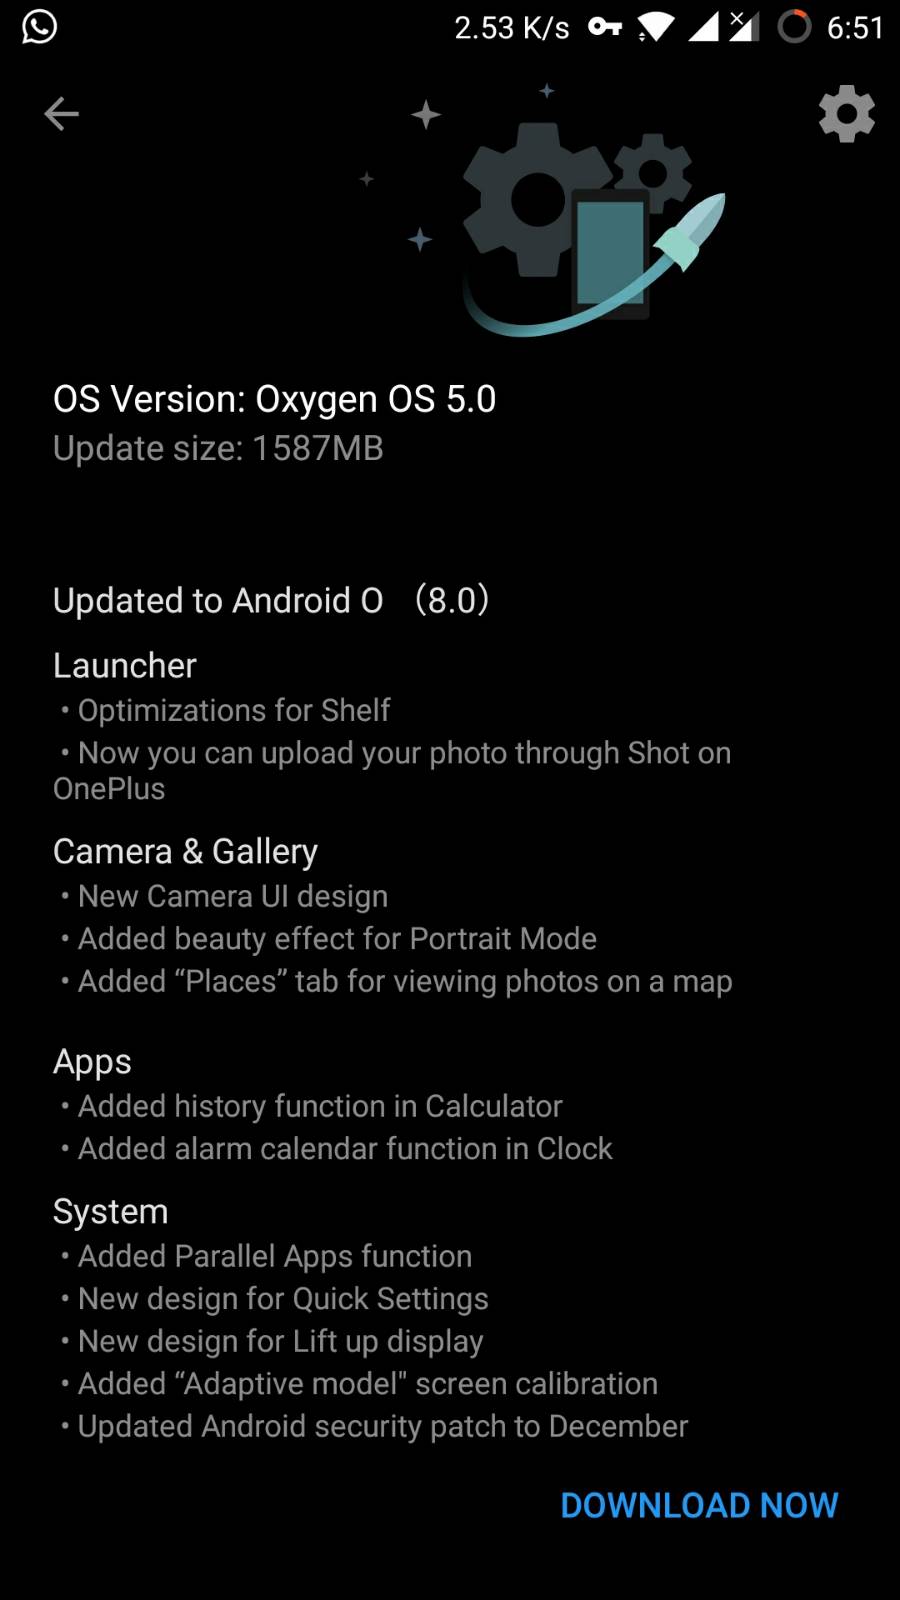 oneplus 5 starts receiving oxygen os 5.0 update based on android oreo 8.0